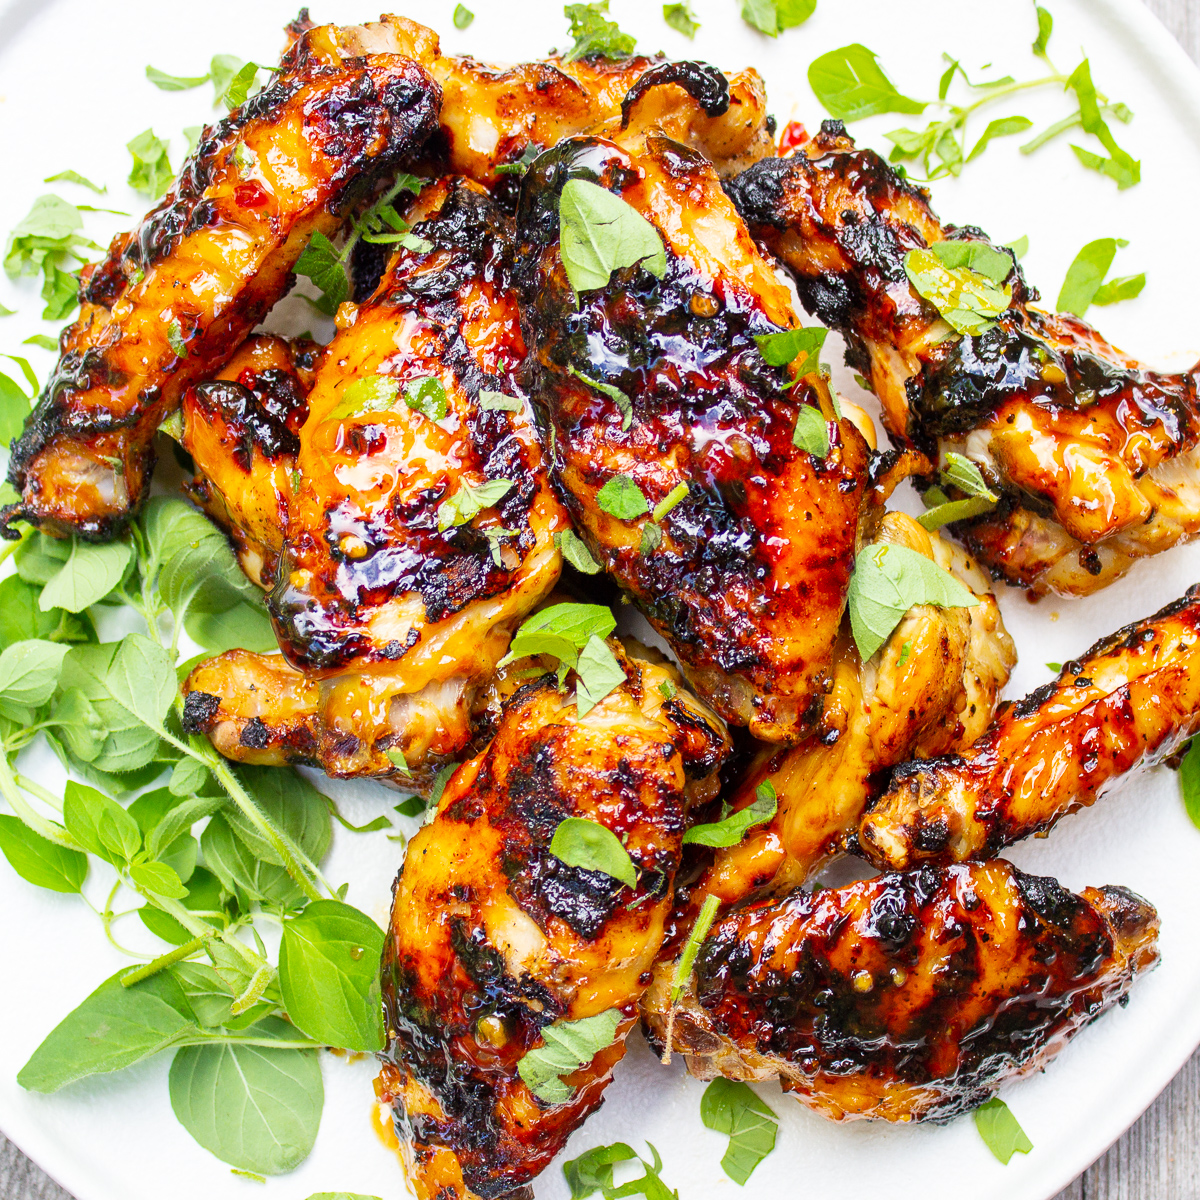 pile of grilled wings on plate garnished with fresh oregano